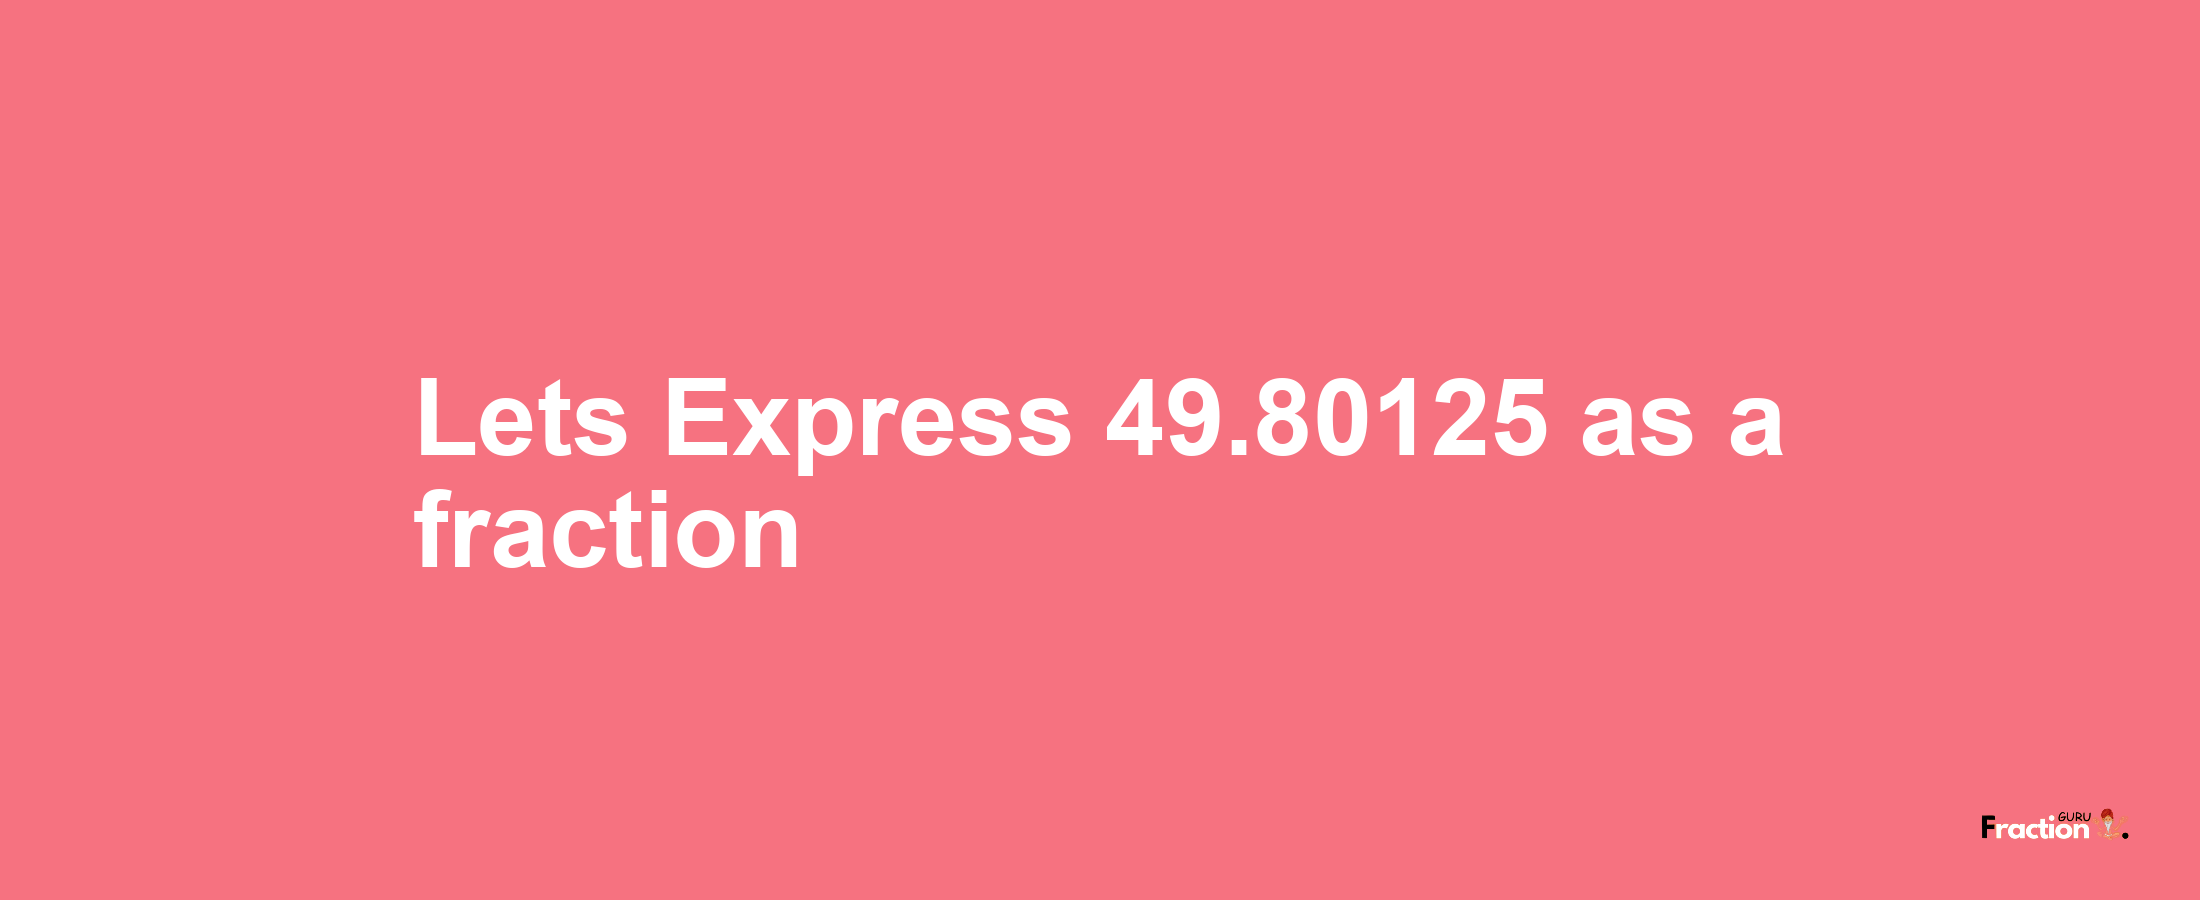 Lets Express 49.80125 as afraction